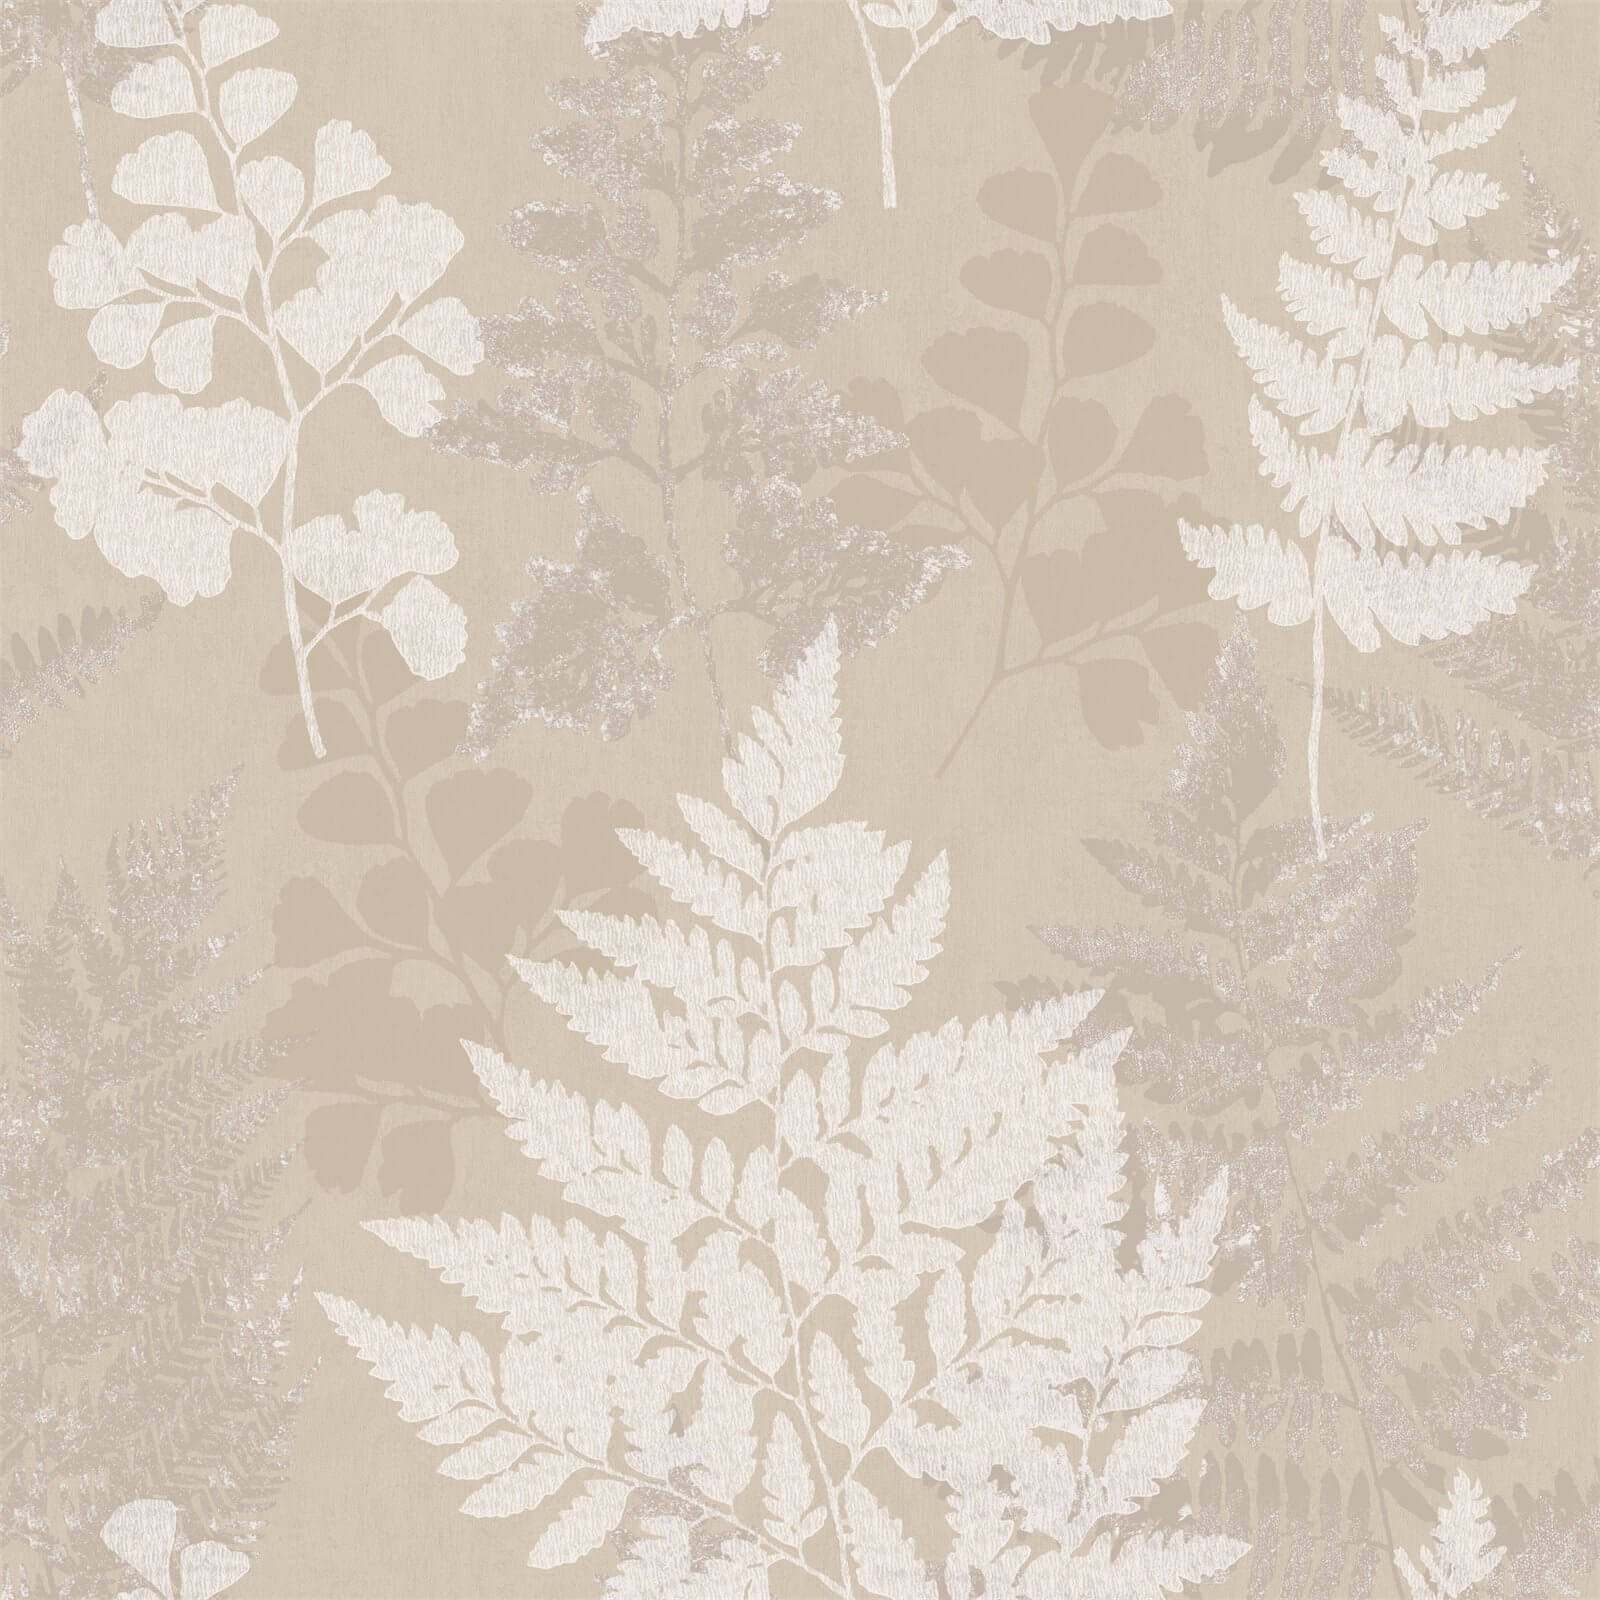 Holden Decor Bramble Leaf Smooth Taupe Wallpaper